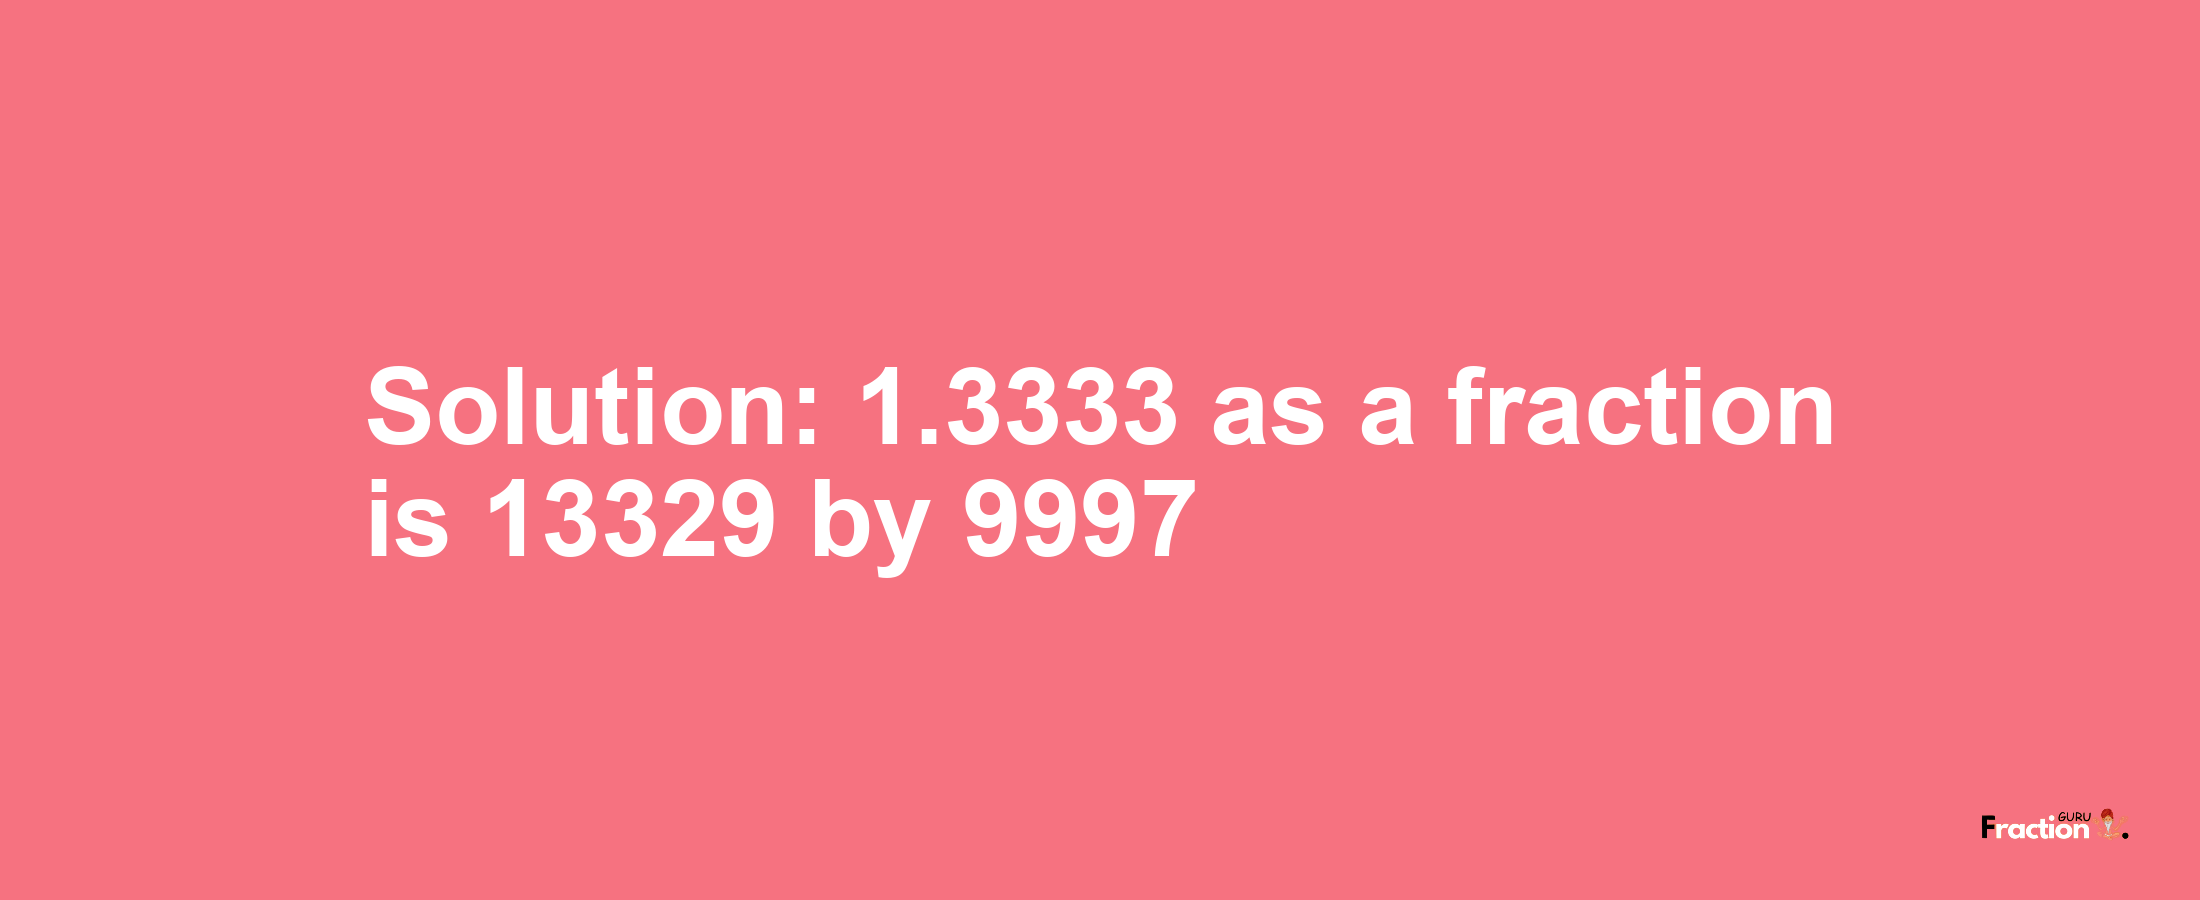 Solution:1.3333 as a fraction is 13329/9997